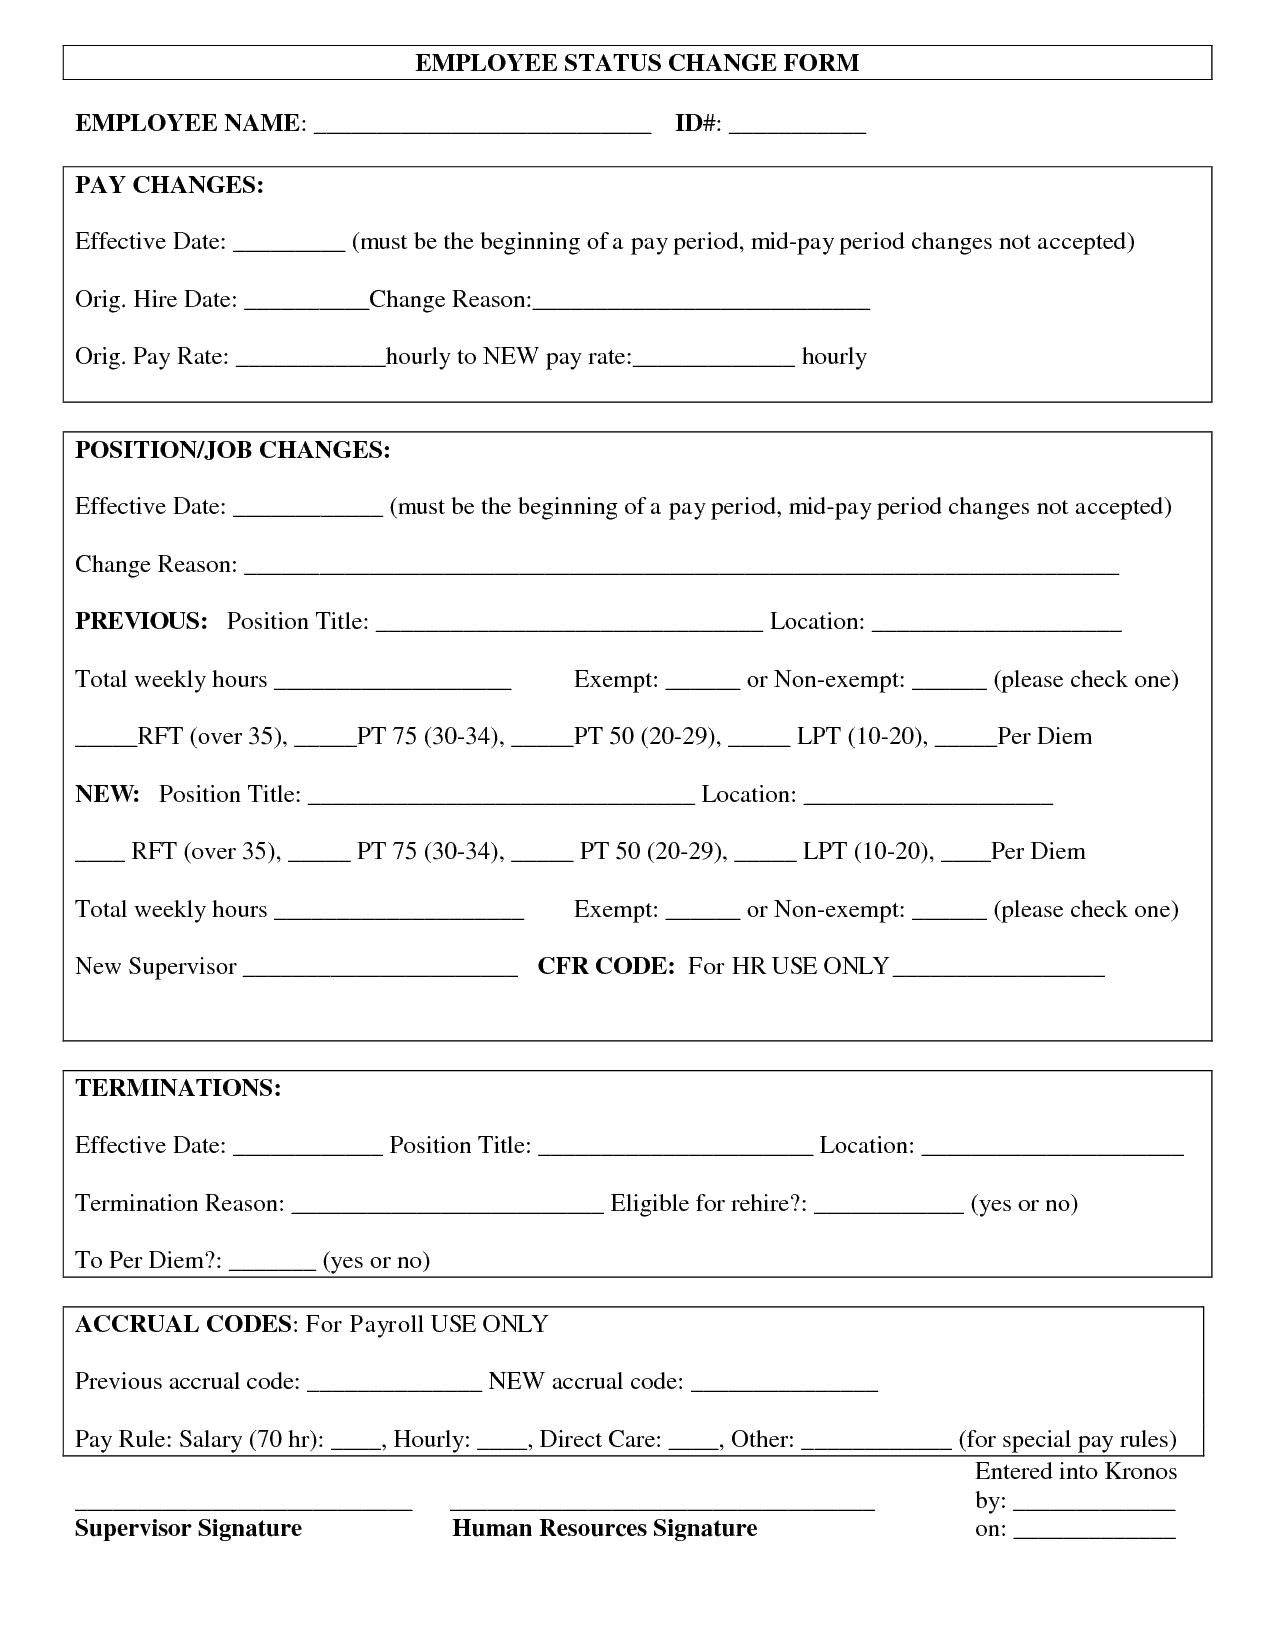 Employee Status Change Forms | Find Word Templates